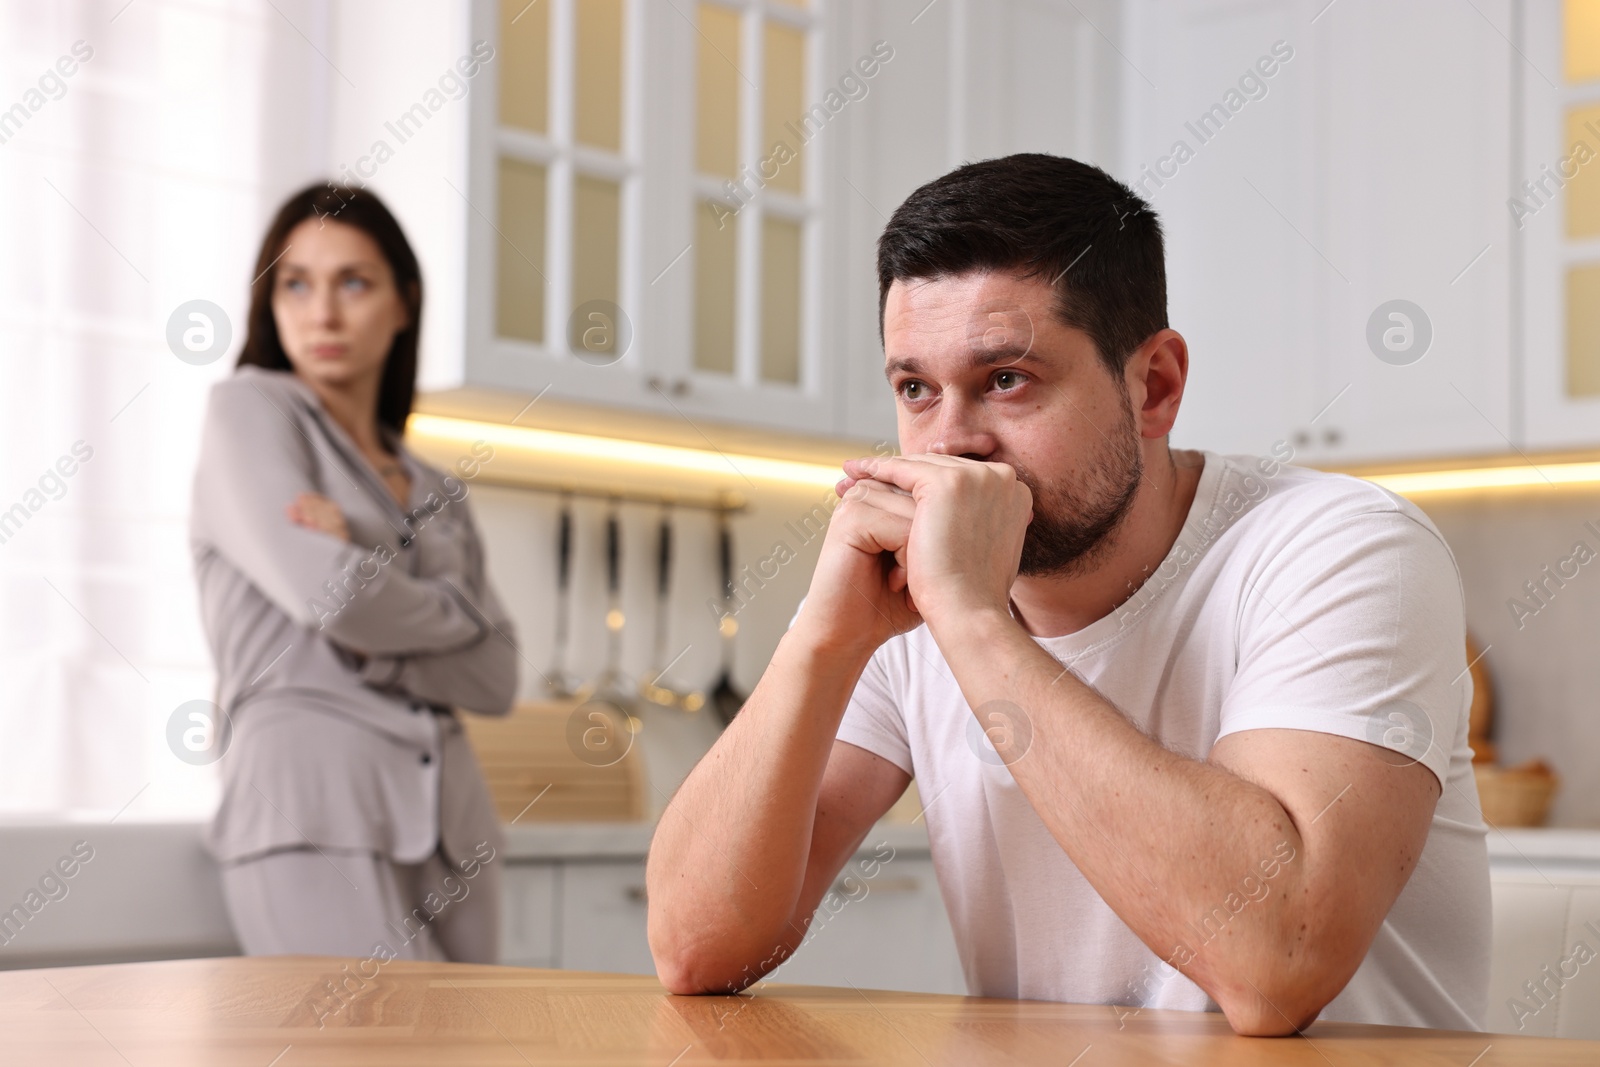 Photo of Offended couple ignoring each other after quarrel in kitchen, selective focus. Relationship problems